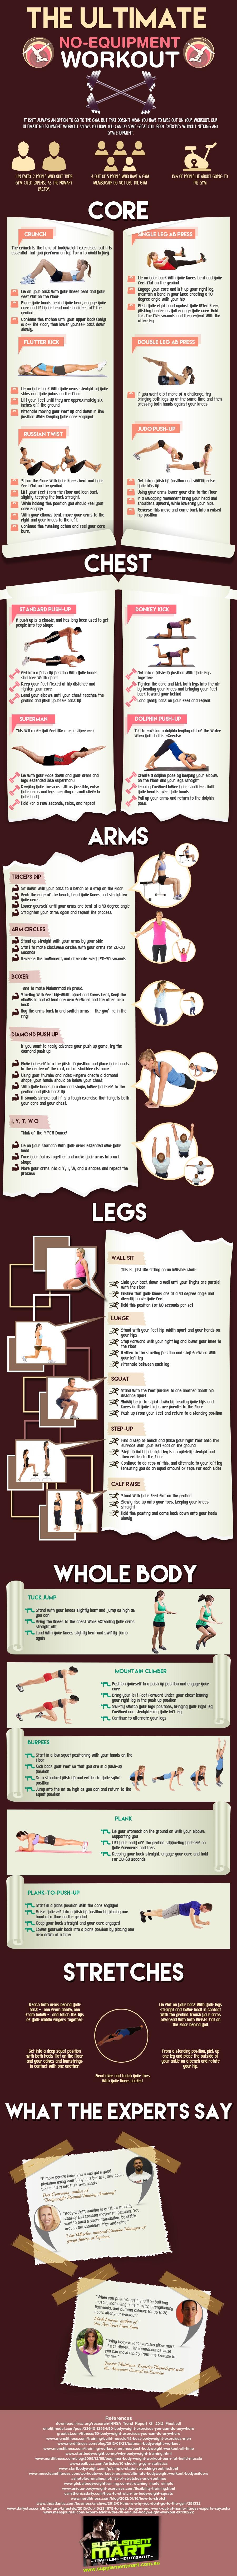 No Equipment Workout Infographic